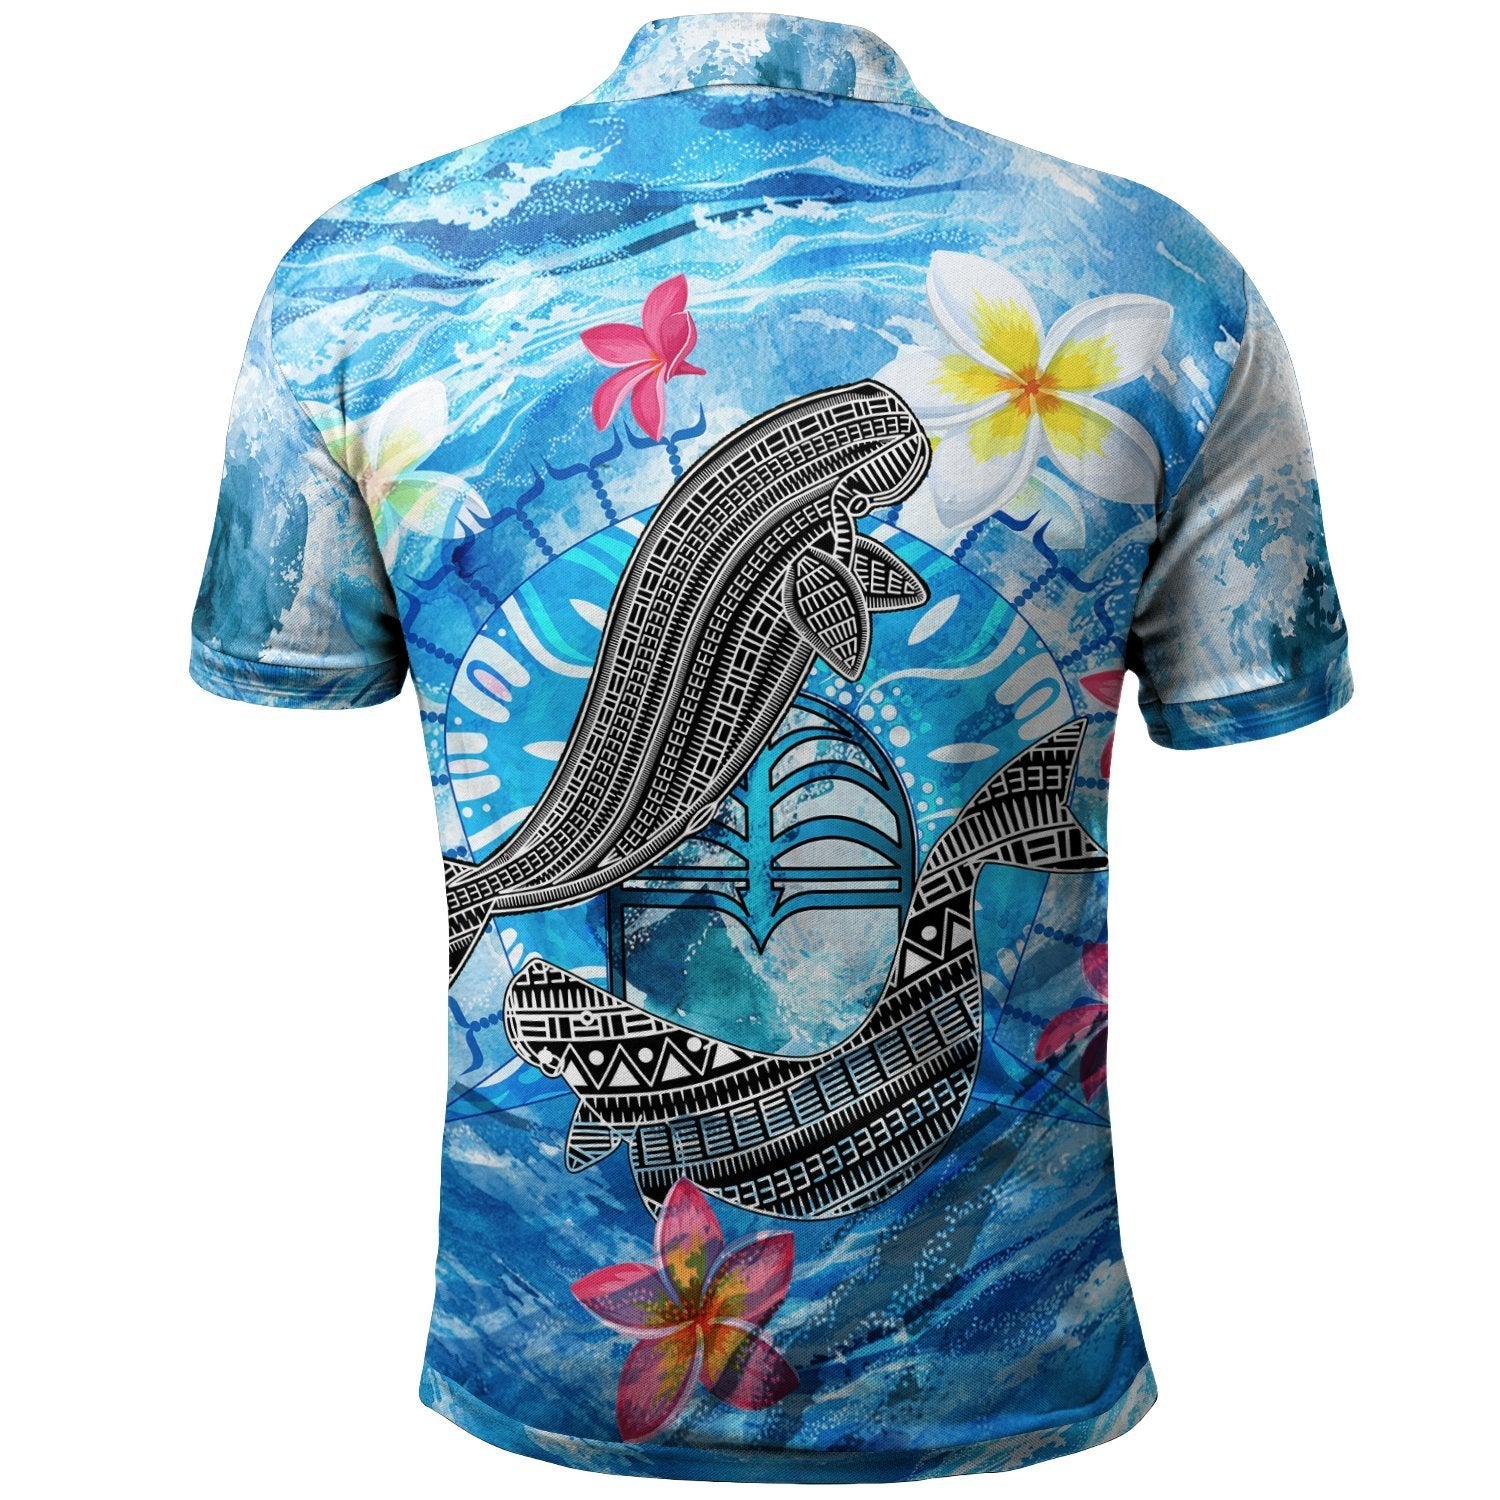 vibe-hoodie-torres-strait-polo-shirts-sea-dhari-and-dolphin